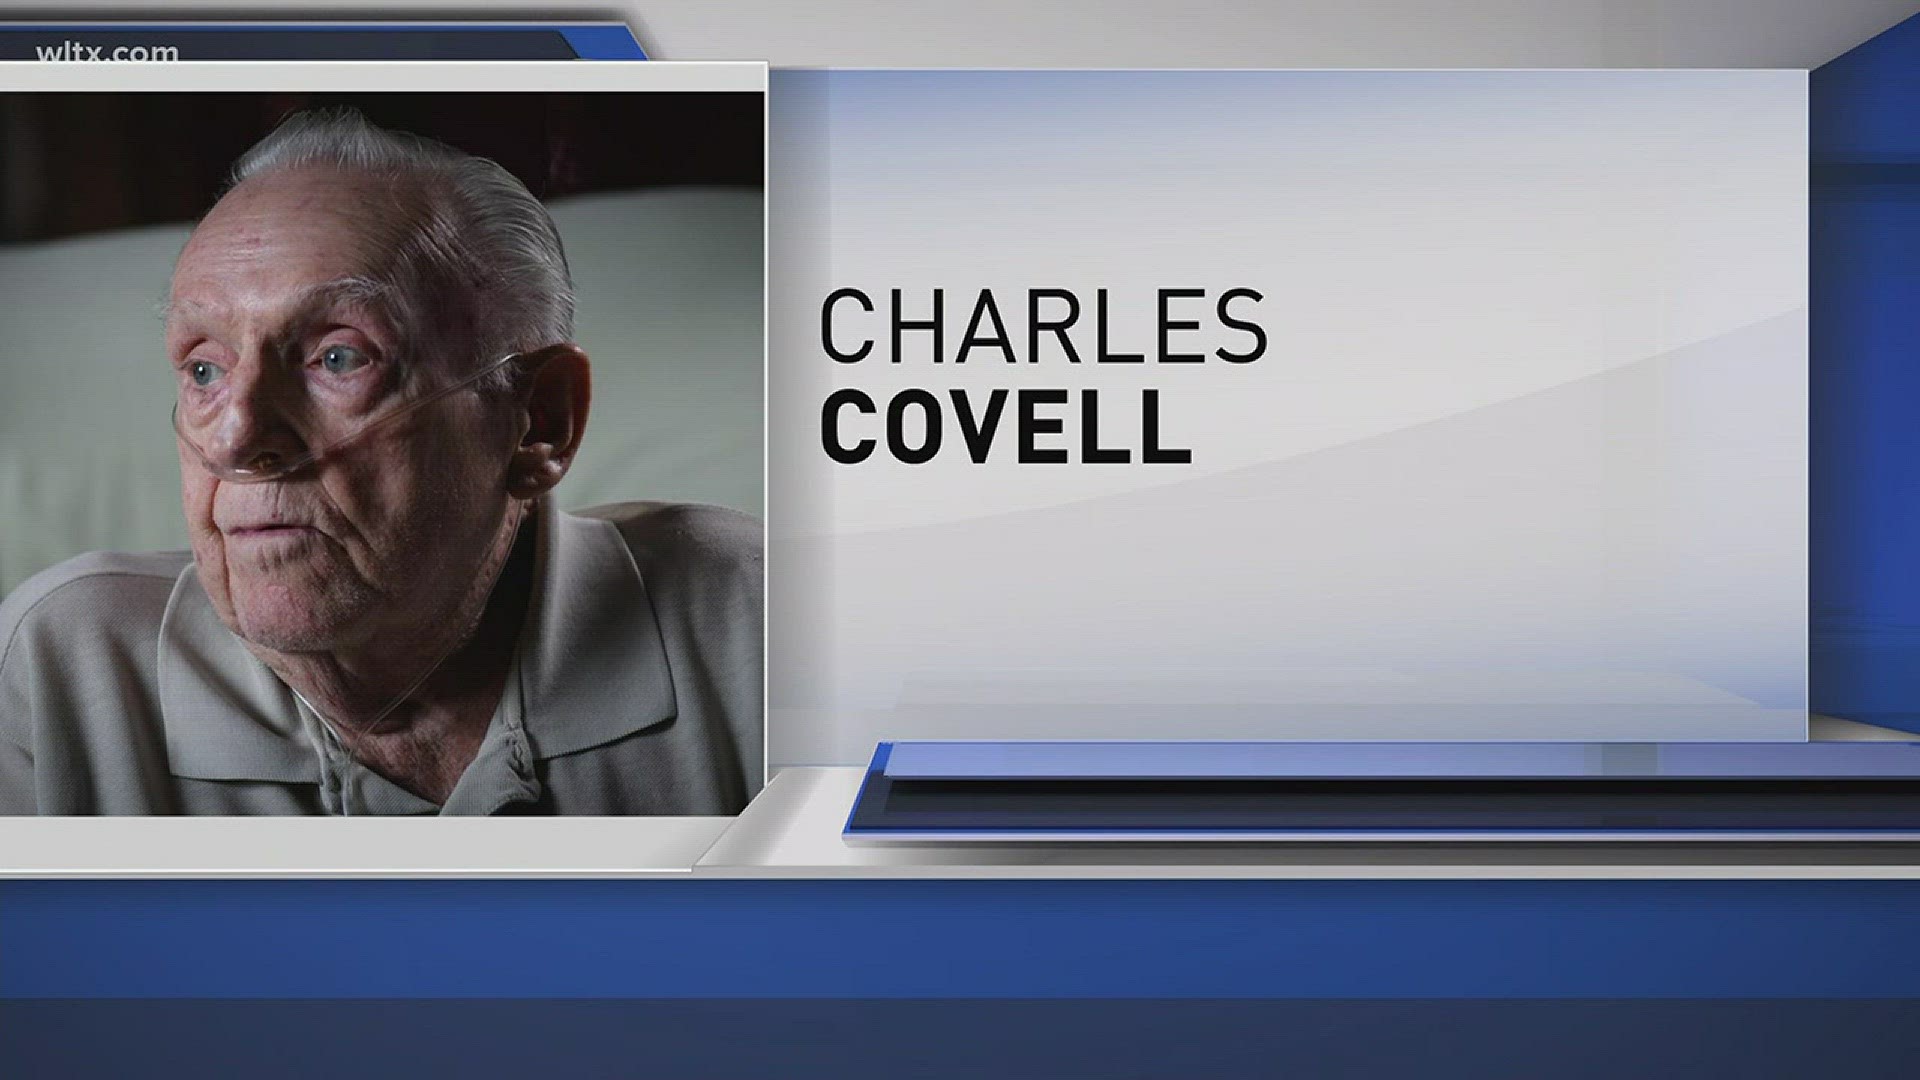 The Fayetteville Observer reported that 81-year-old Charles Covell was surprised to learn that he had been declared dead by the Veterans Affairs Department last month.